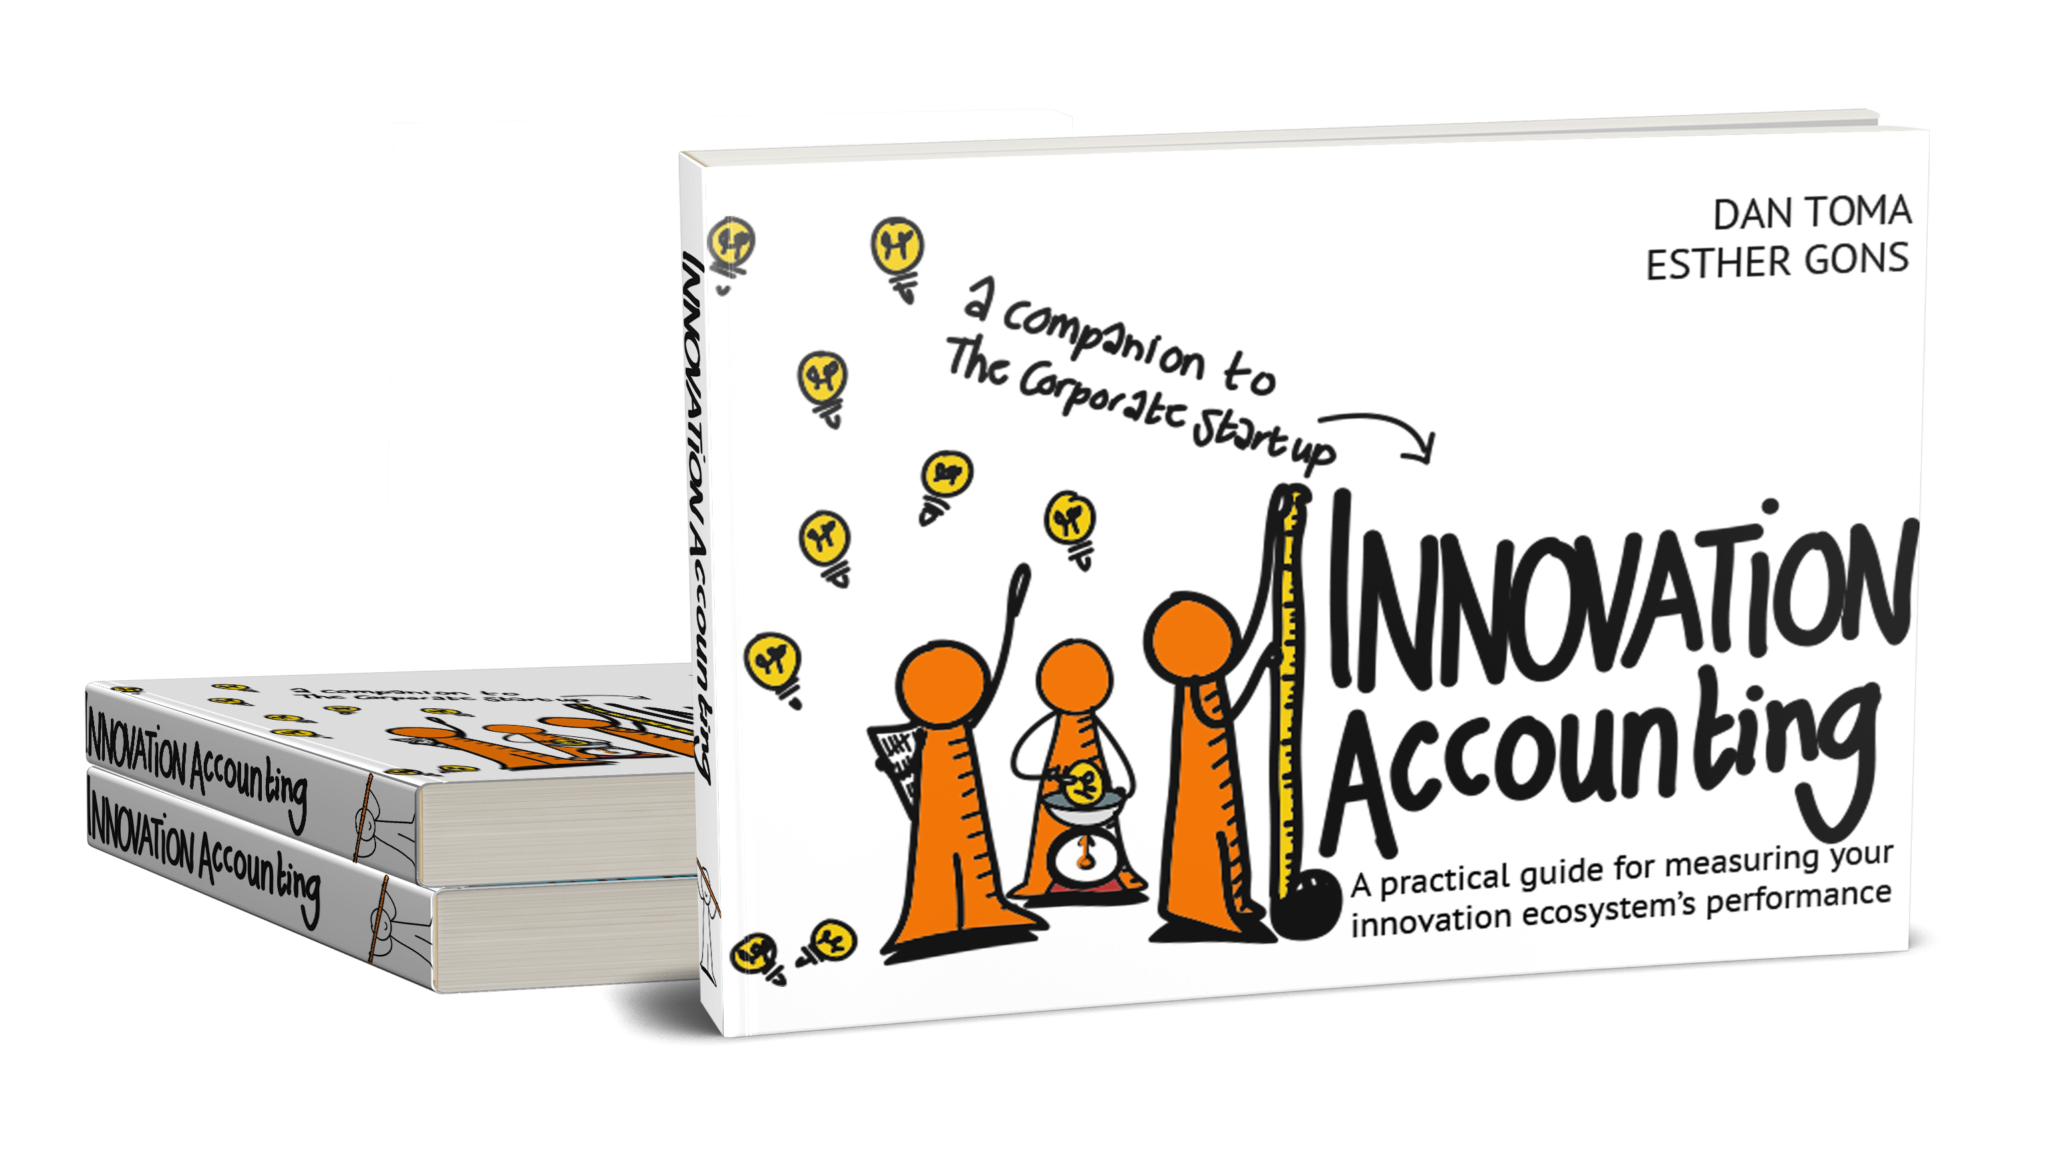 Innovation Accounting book cover